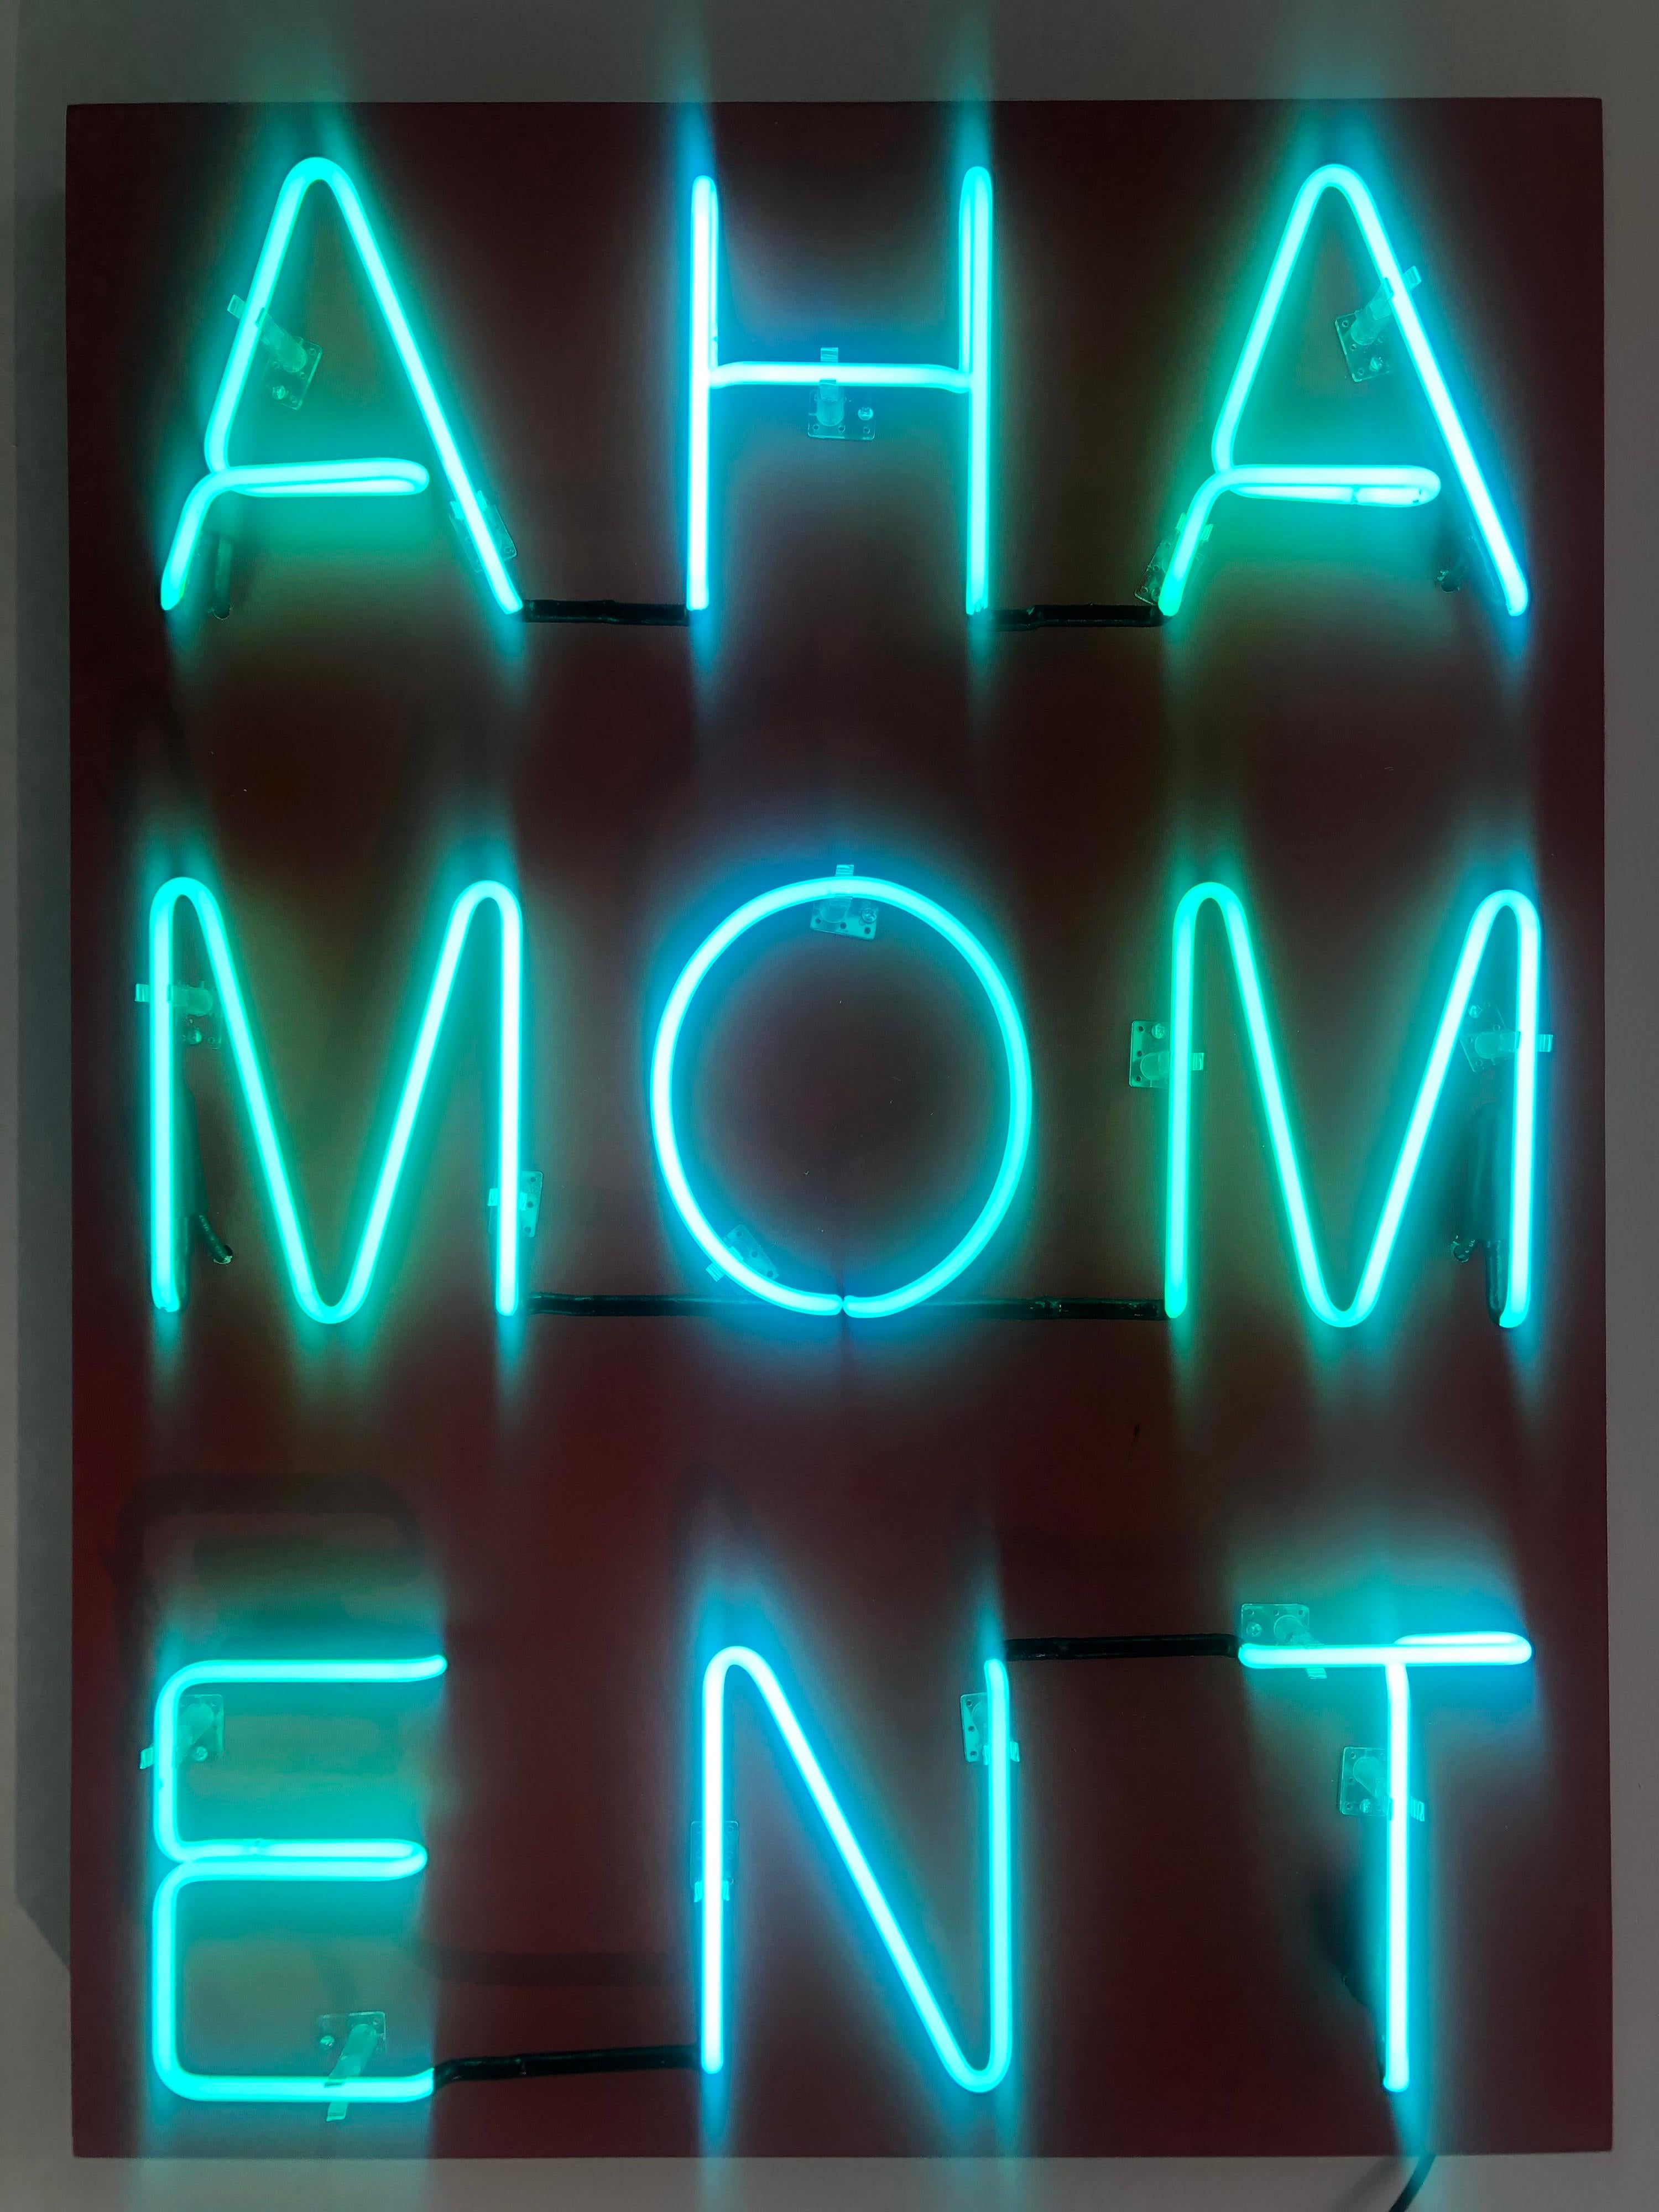 Acrylic and Neon on Panel Titled: AHA MOMENT  - Mixed Media Art by William Finlayson